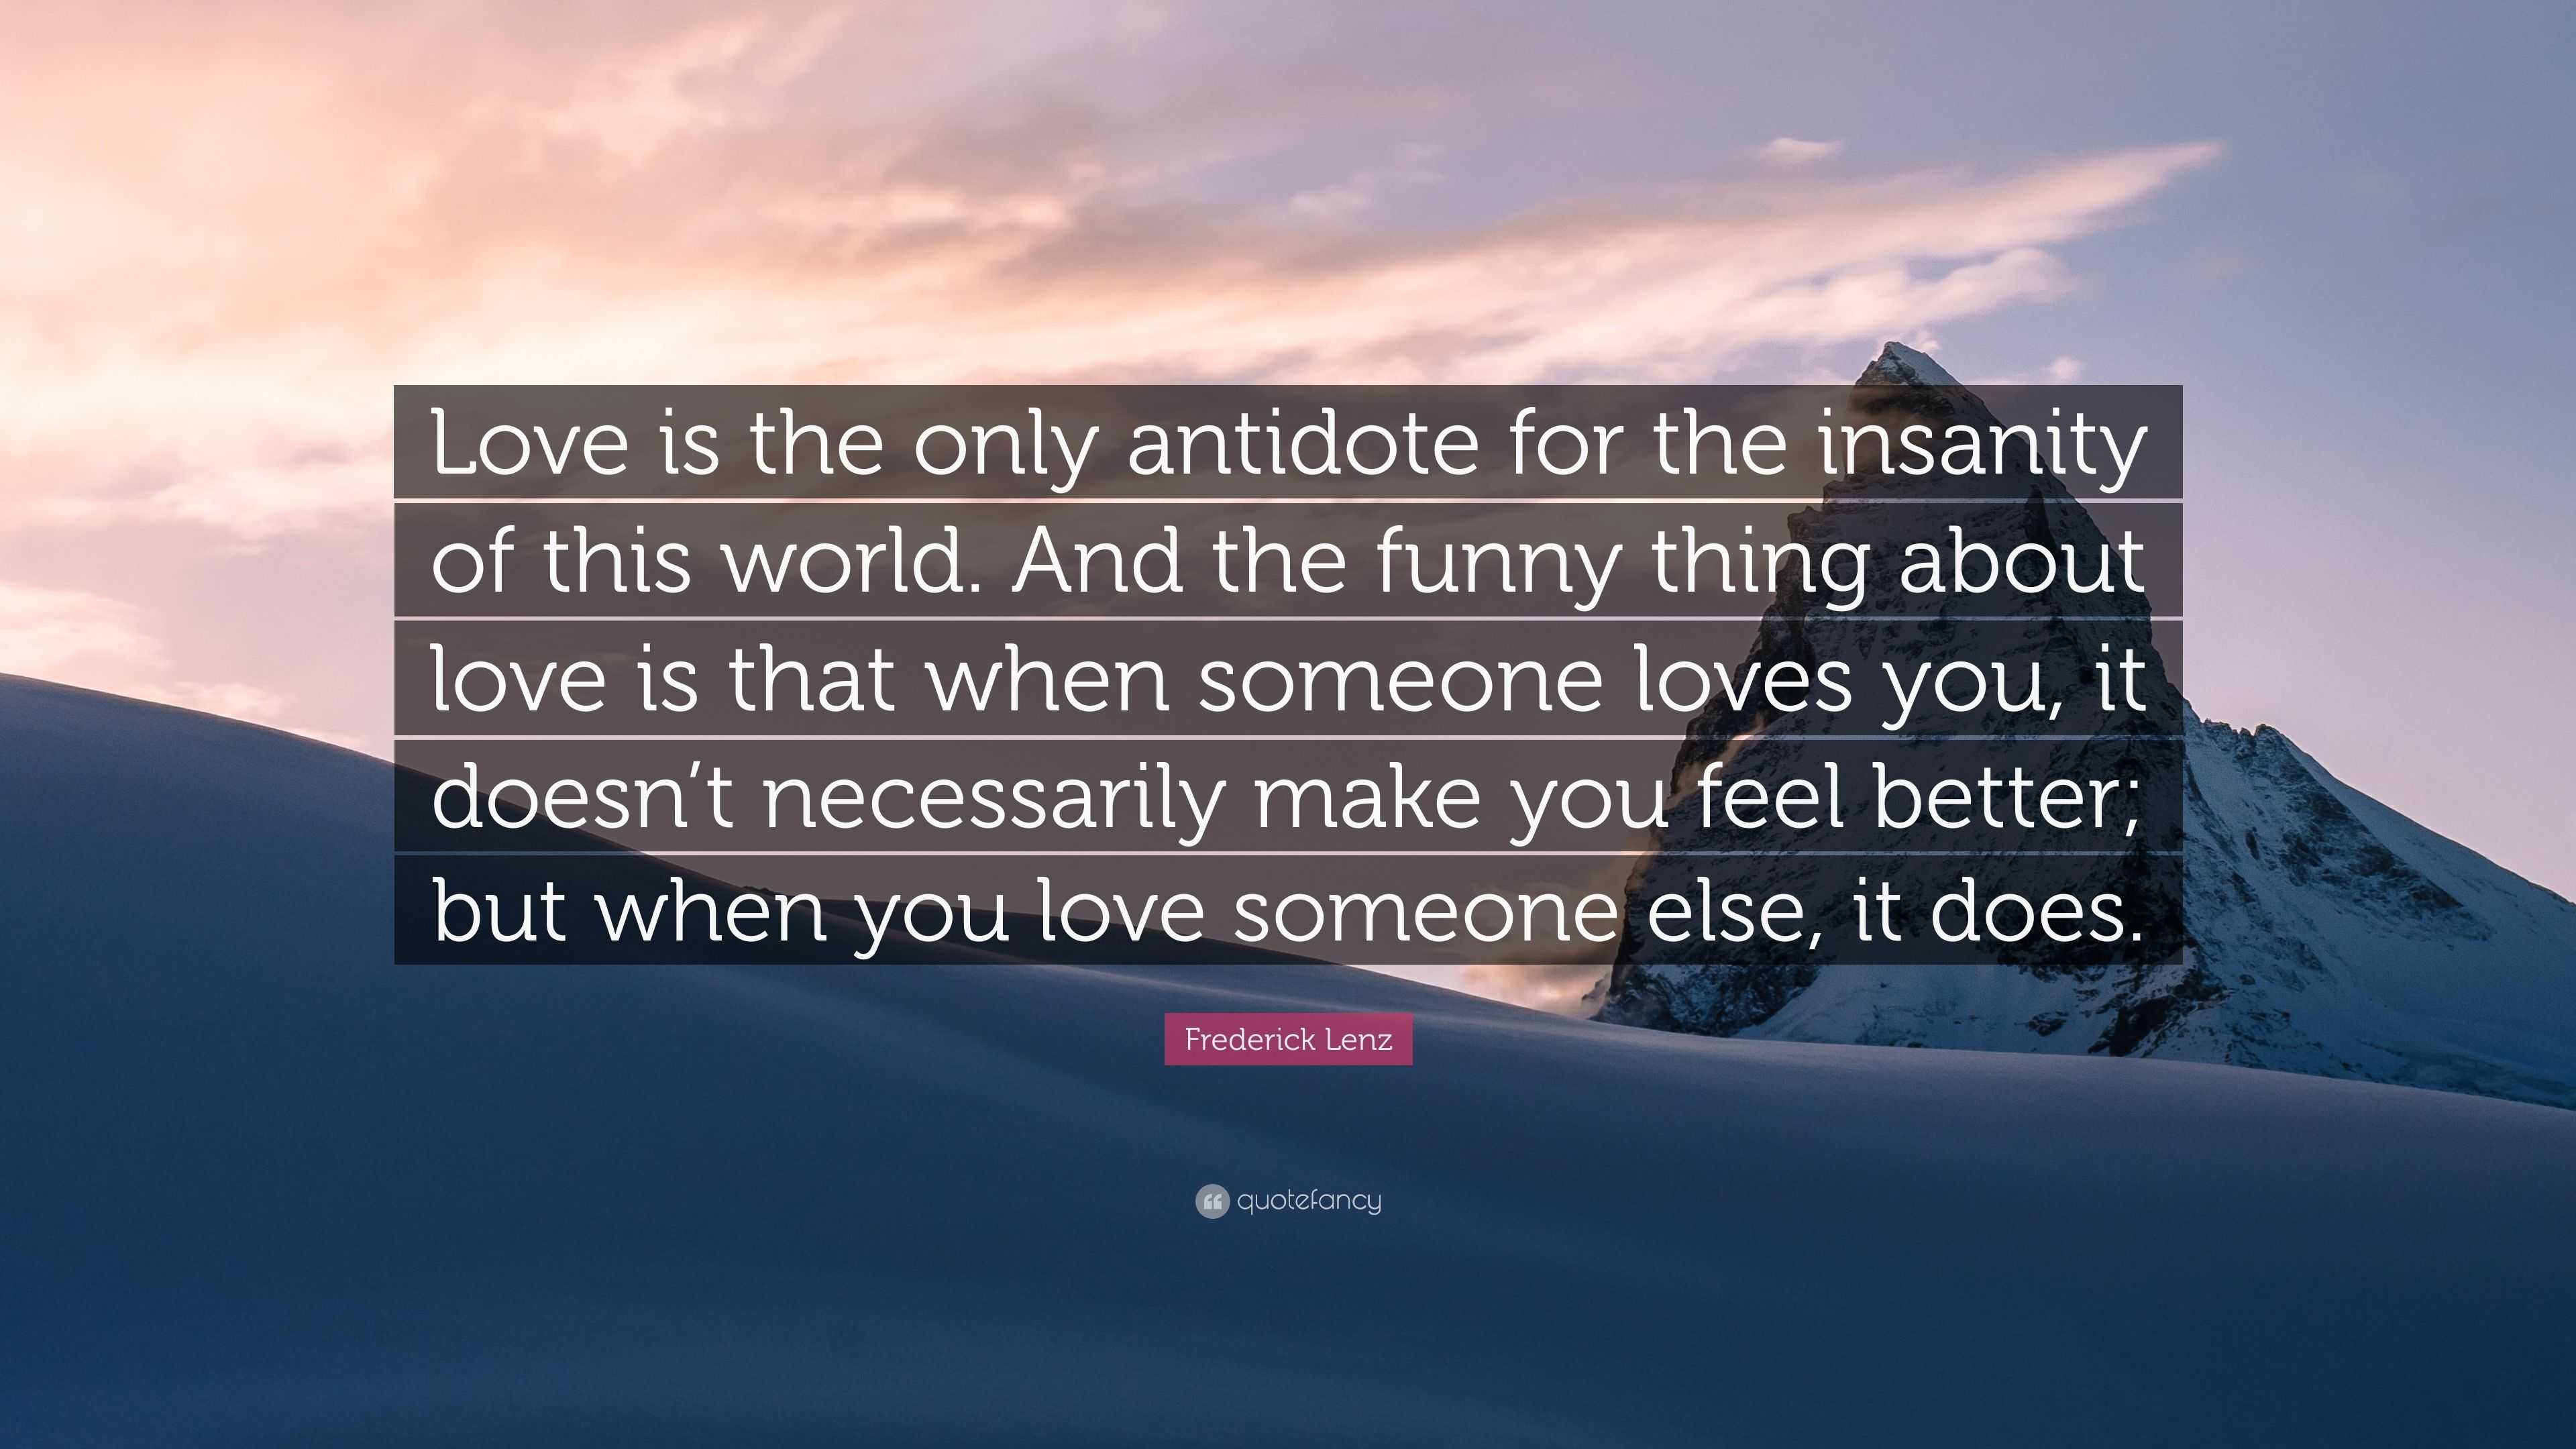 Frederick Lenz Quote “Love is the only antidote for the insanity of this world